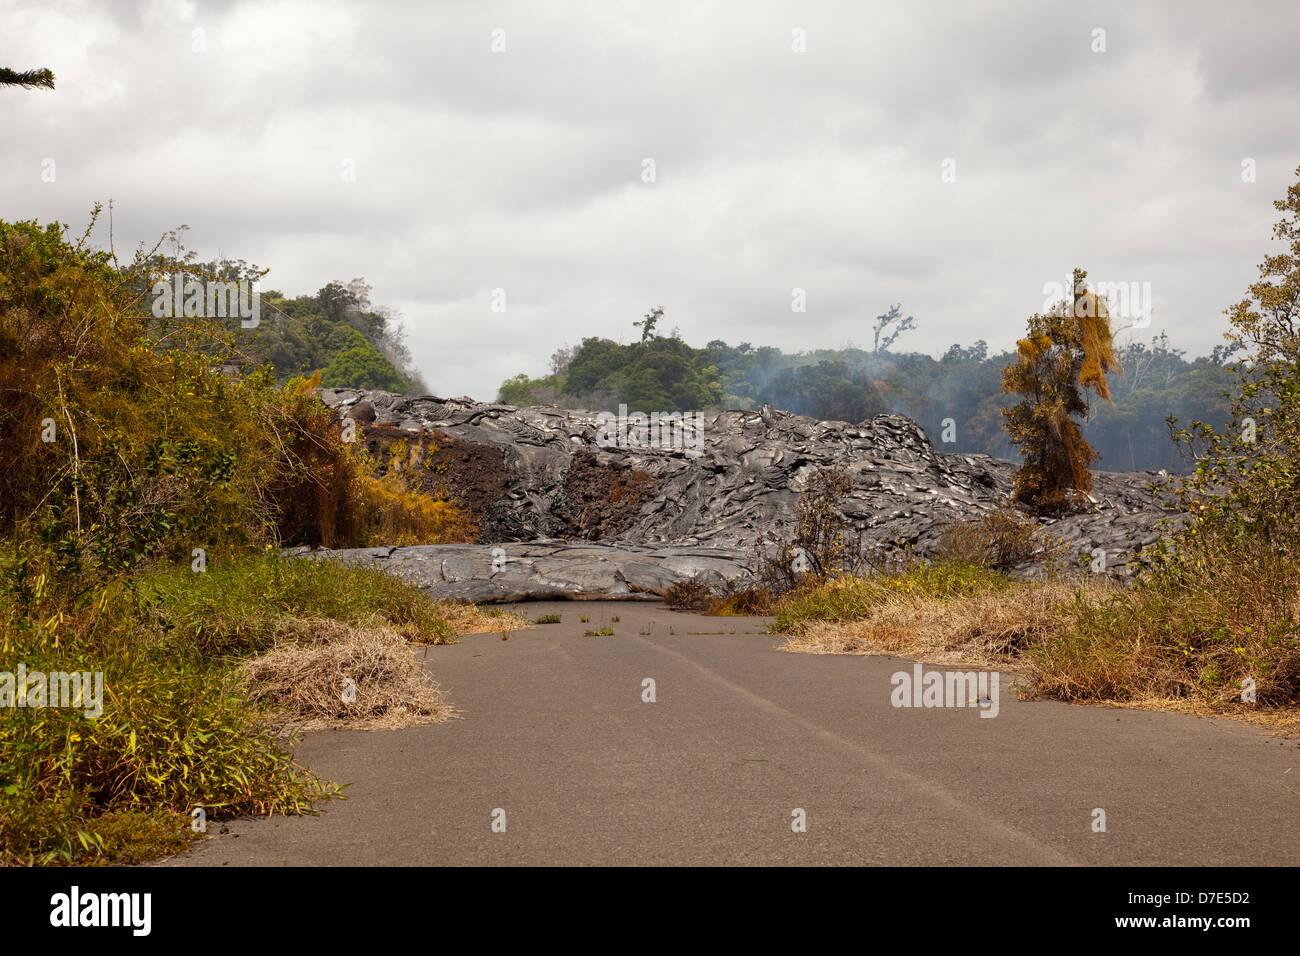 Lava flowing over a road on The Big Island of Hawaii Stock Photo - Alamy